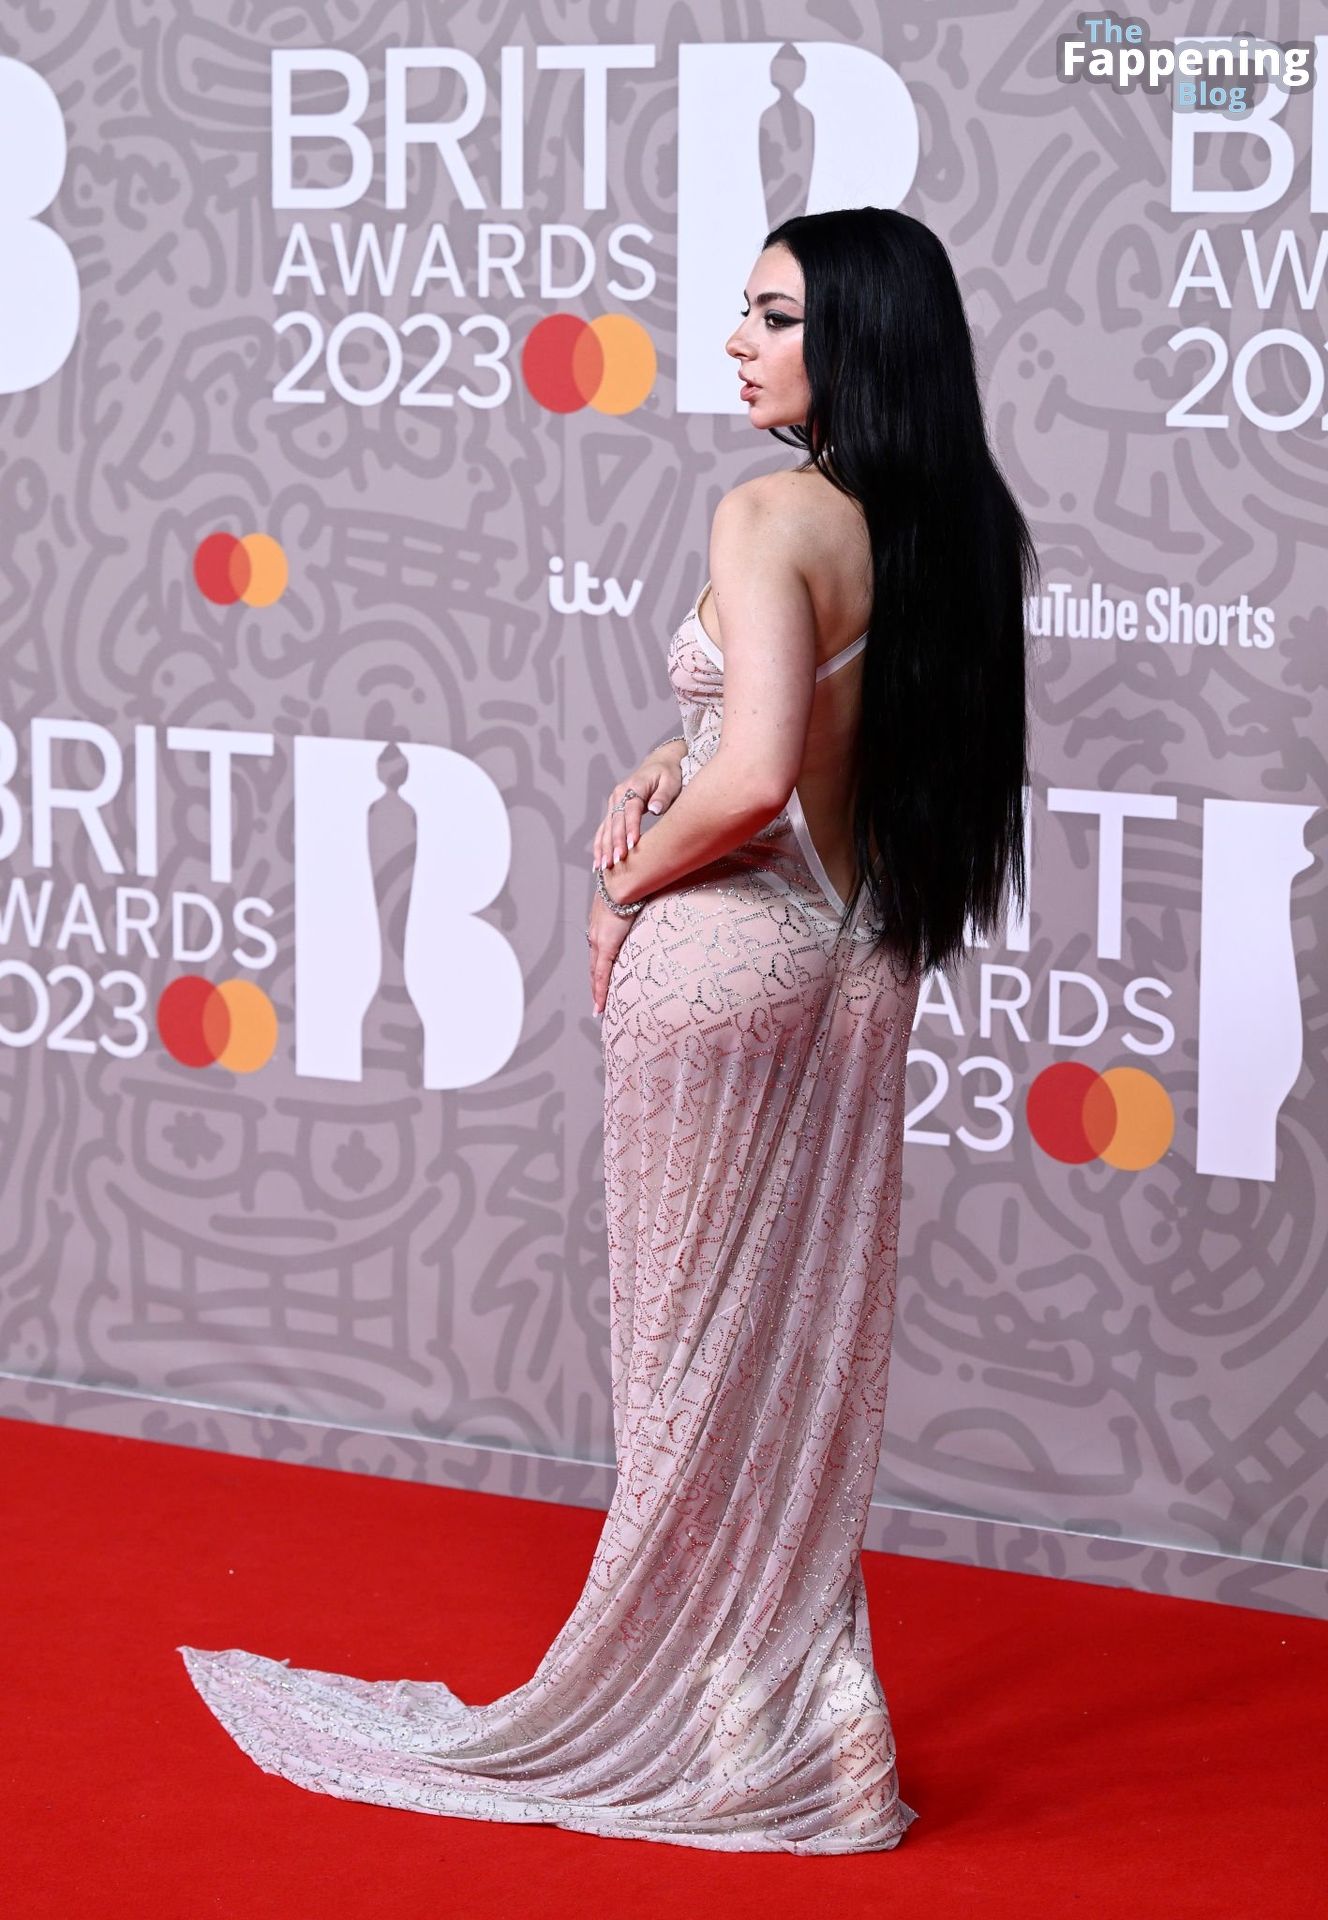 Charli XCX See Through Nudity The Fappening Blog 69